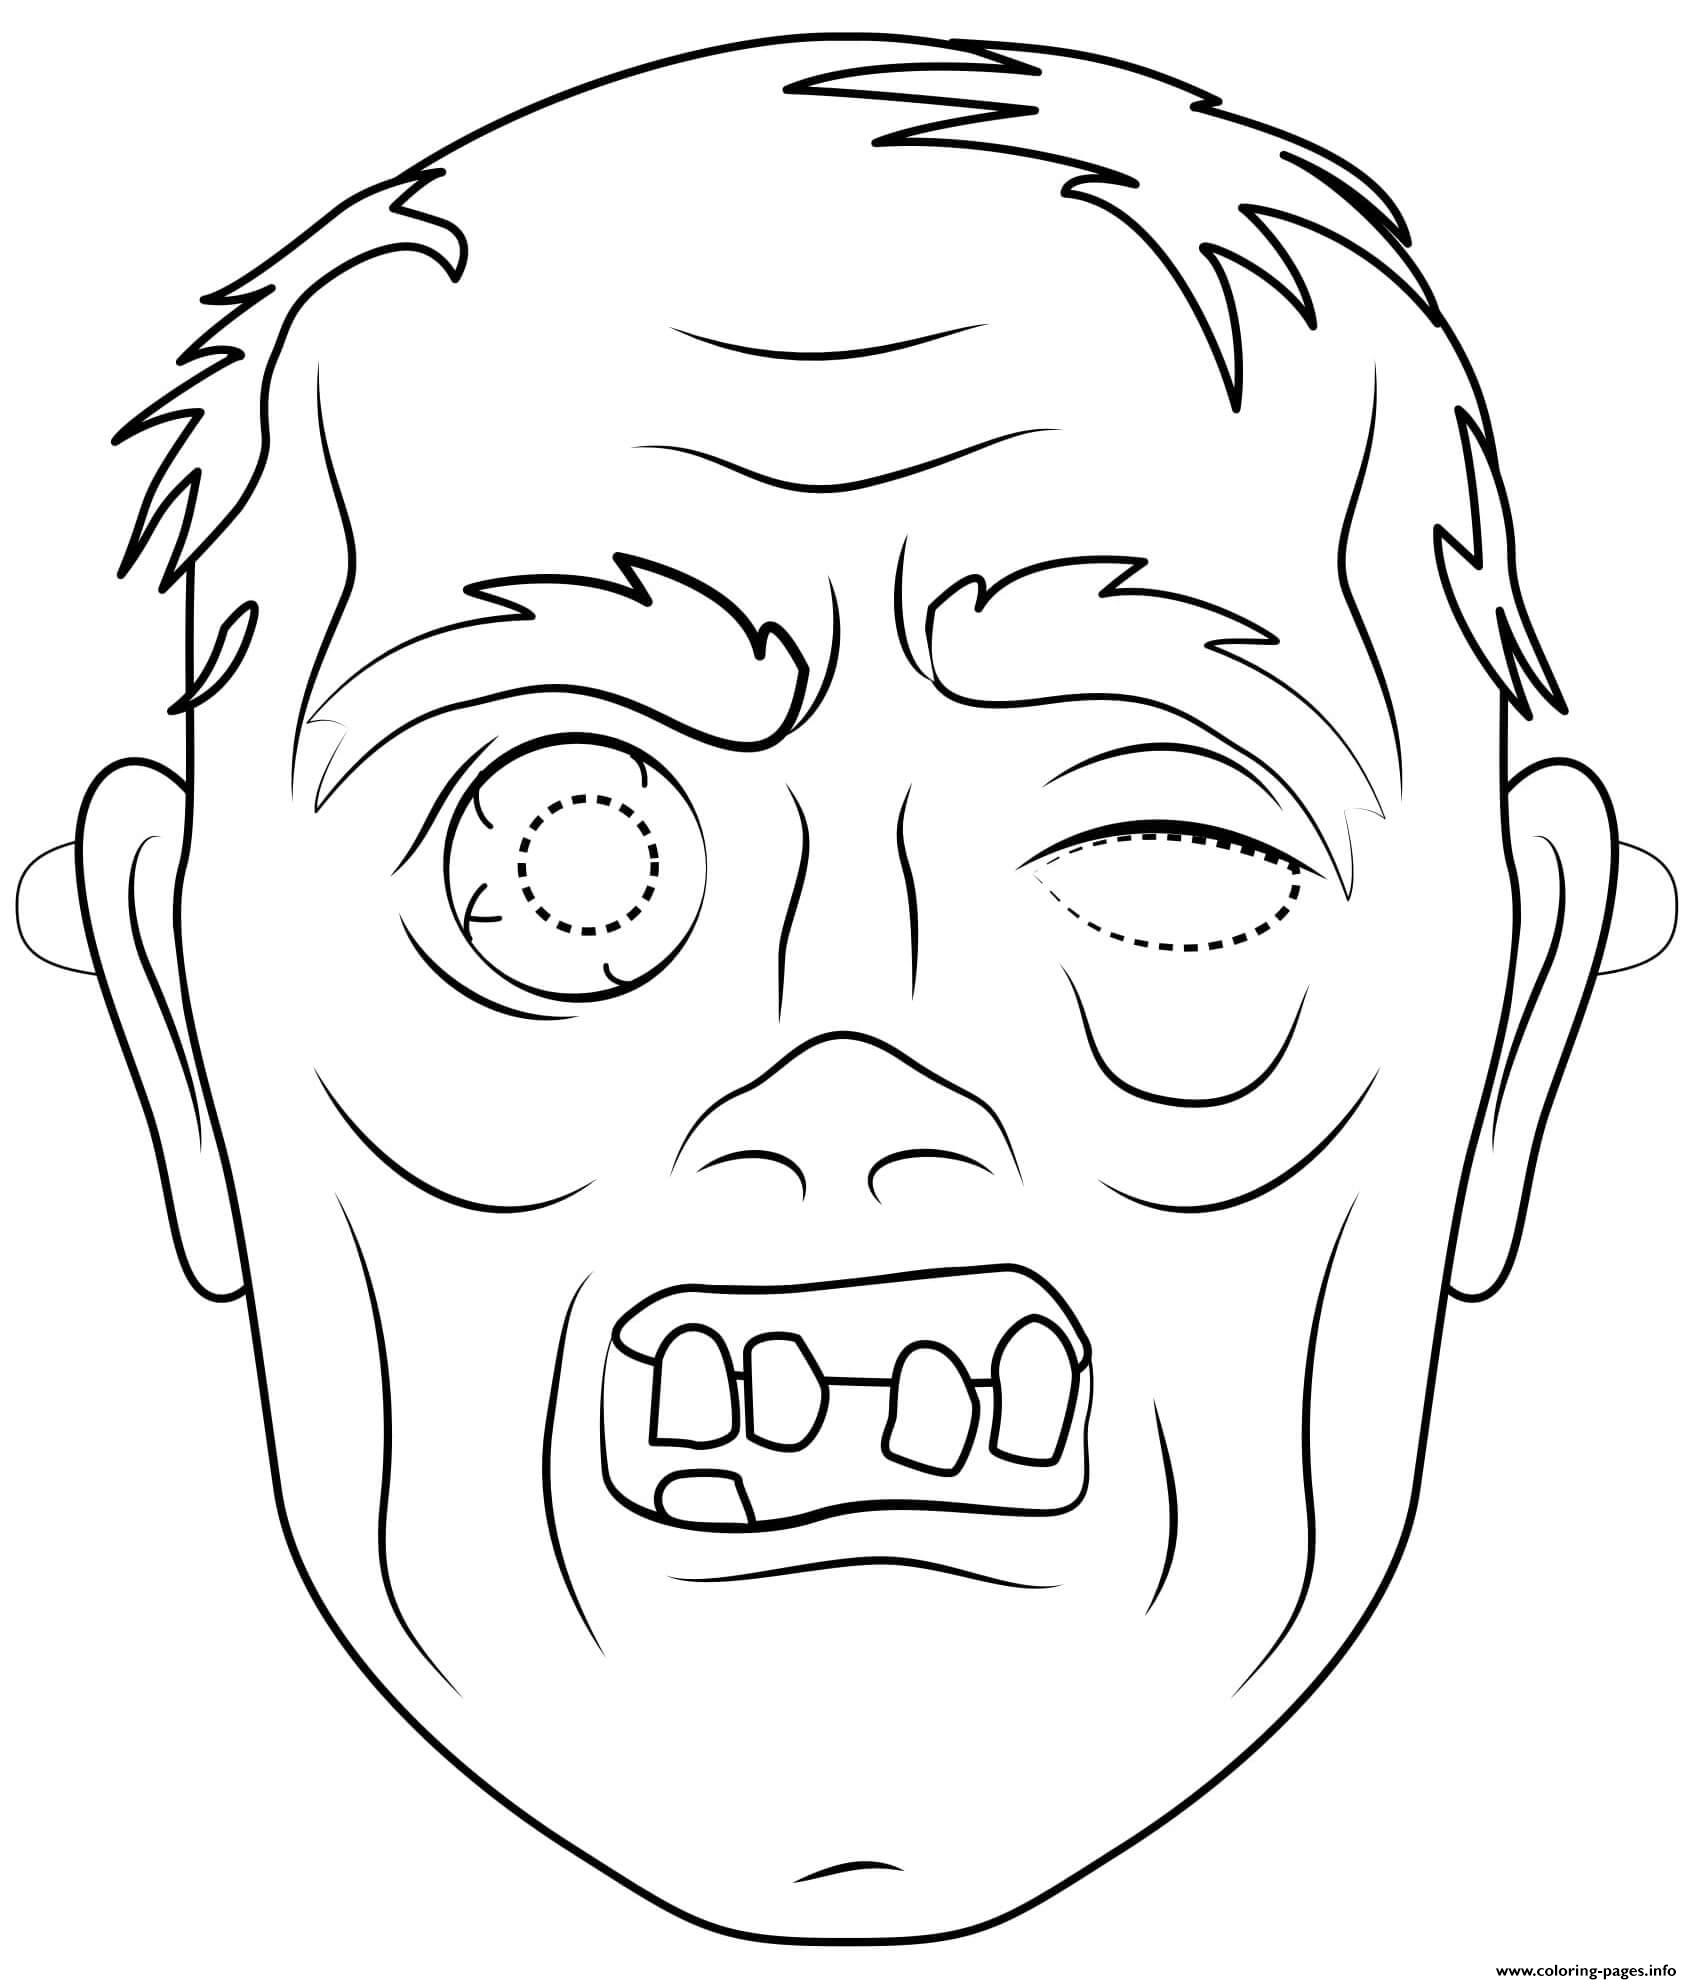 Zombie Mask Outline Halloween coloring